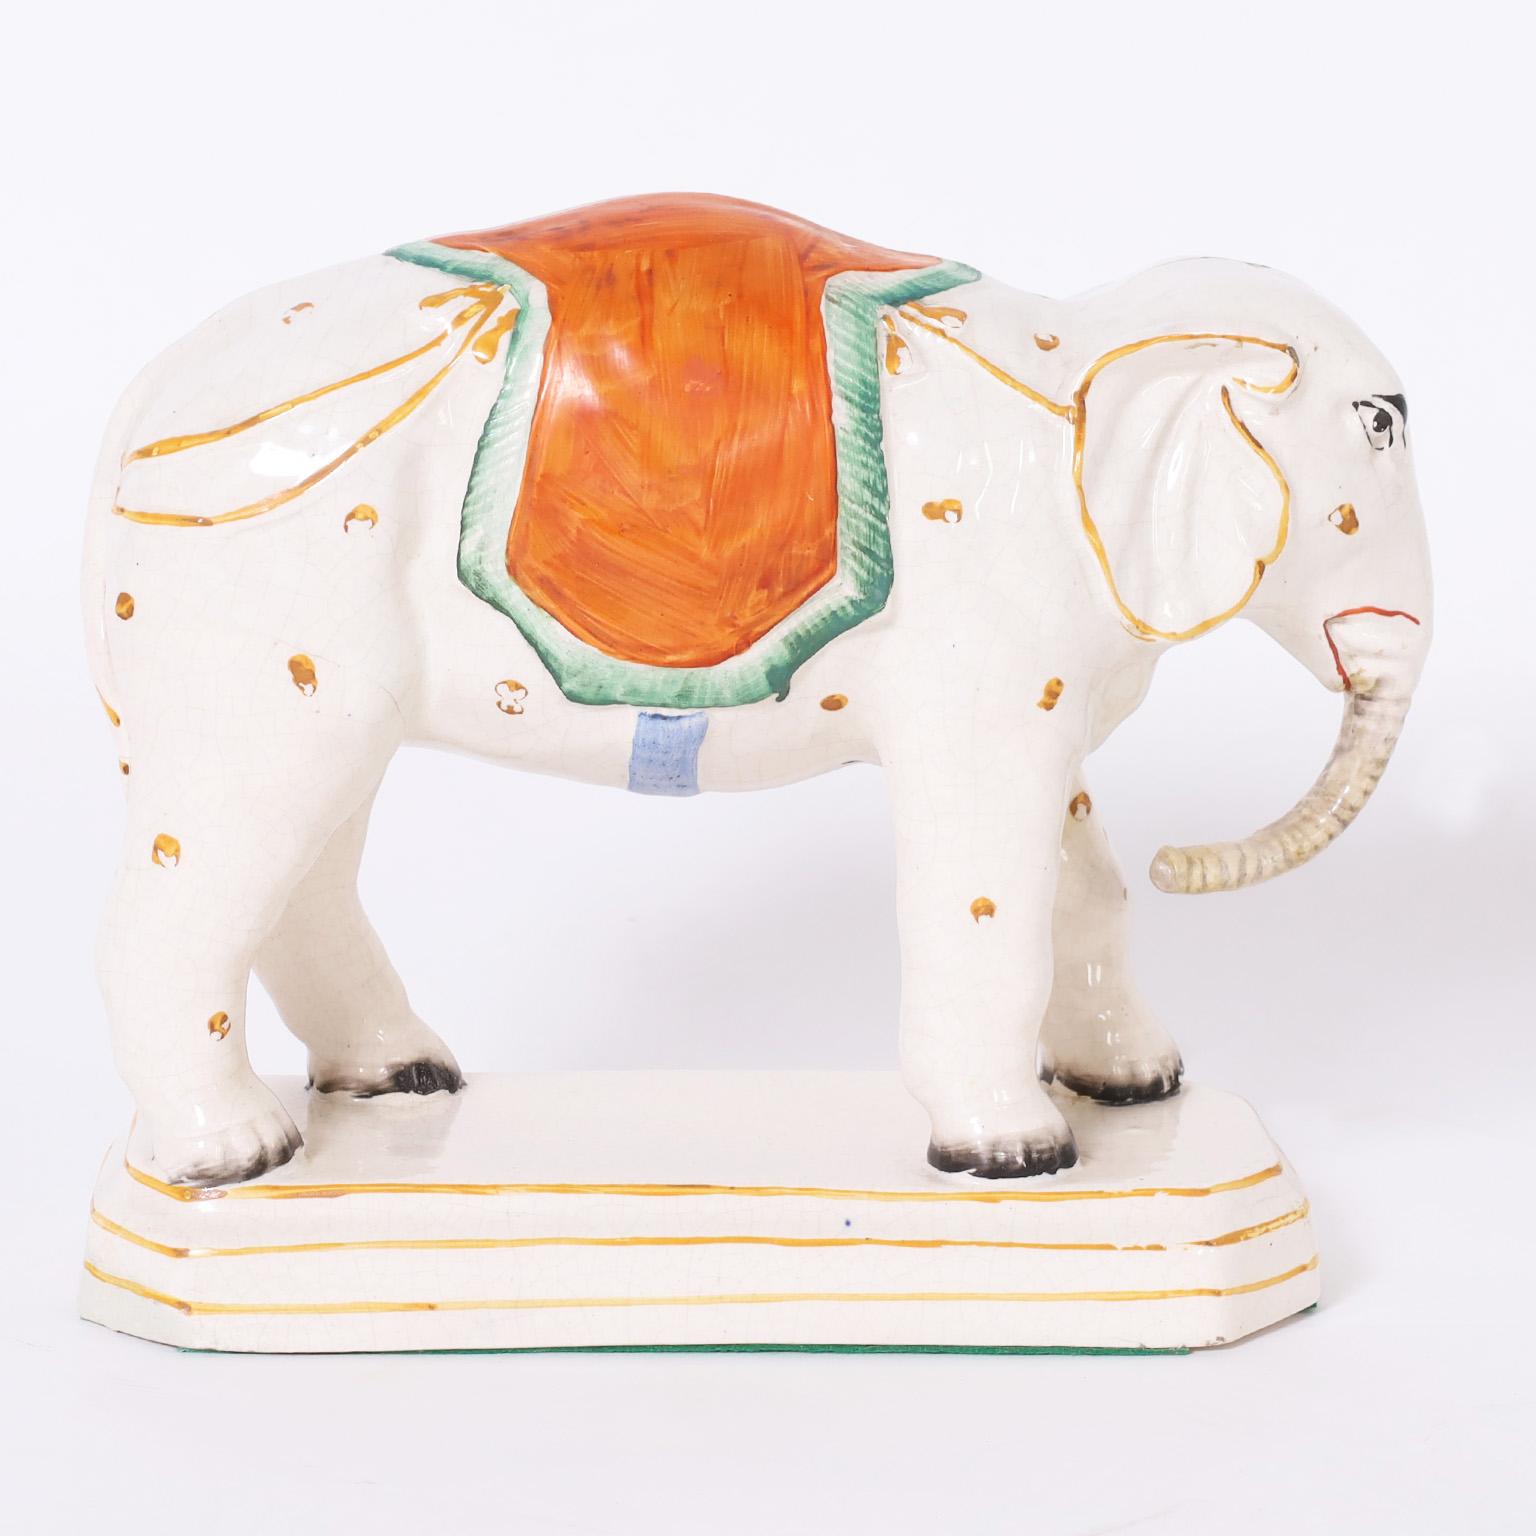 19th century English Staffordshire elephant crafted in ceramic, decorated and glazed now slightly crackled.